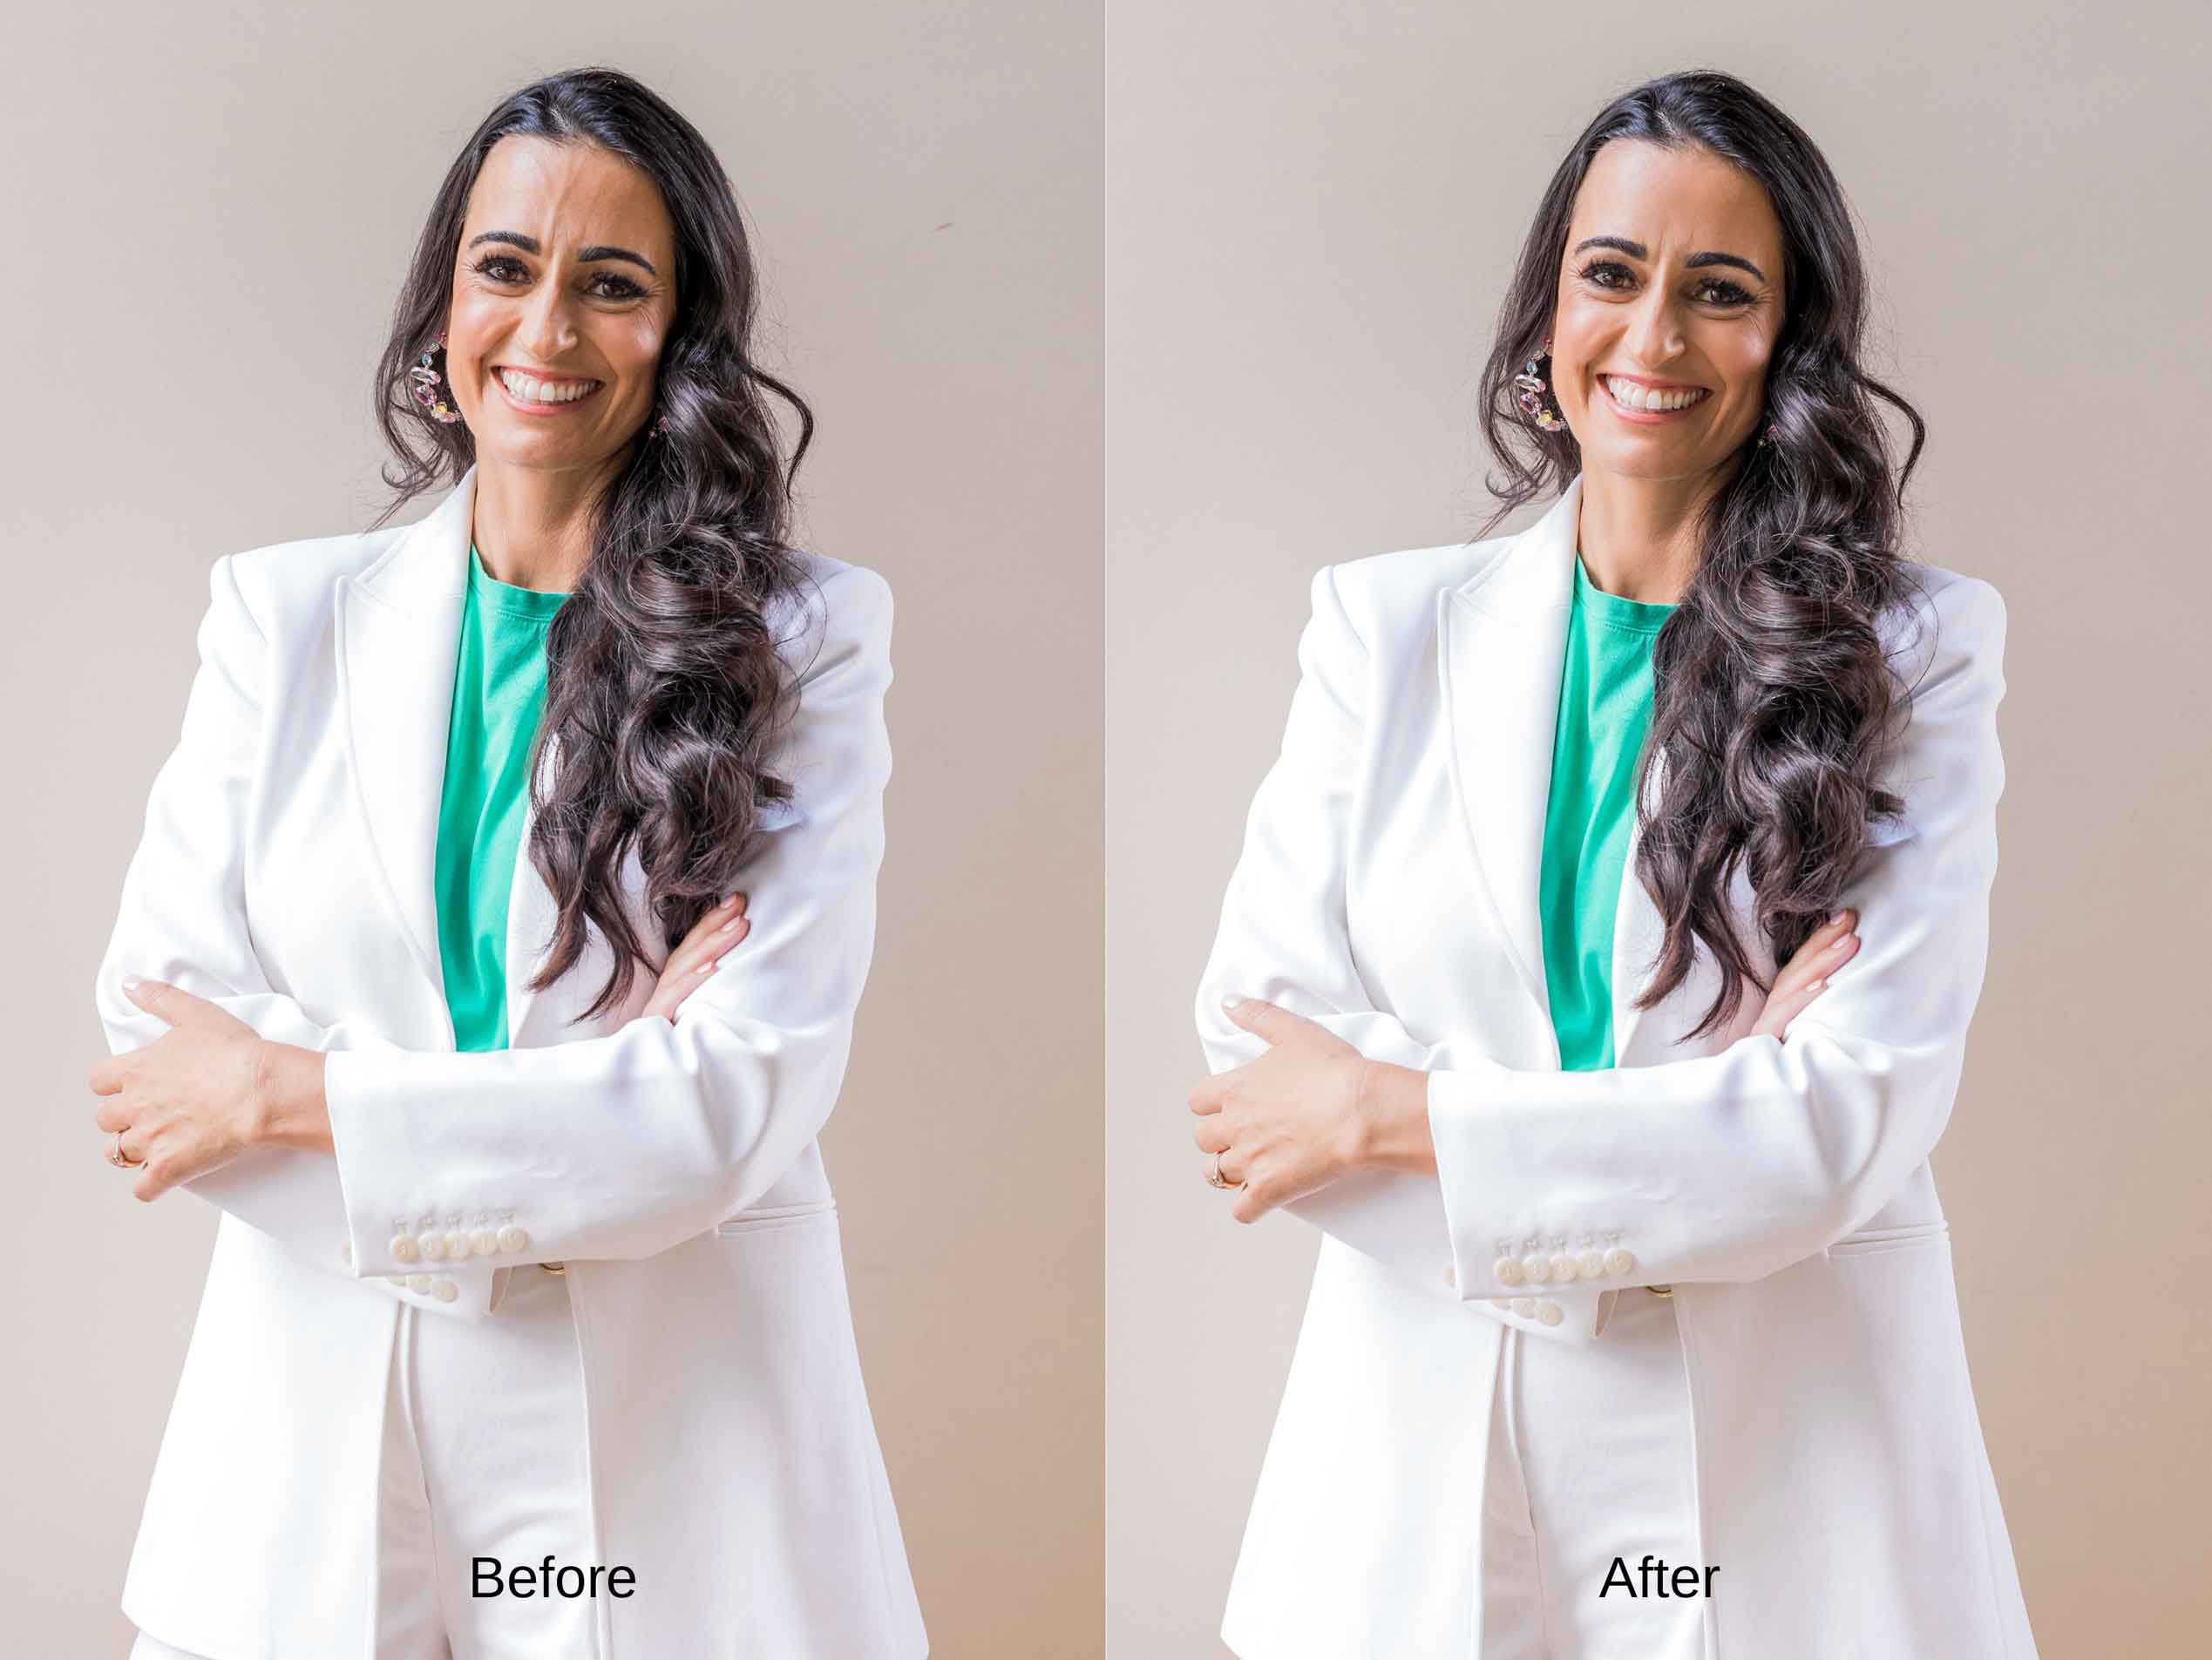 Photoshop Before/After example